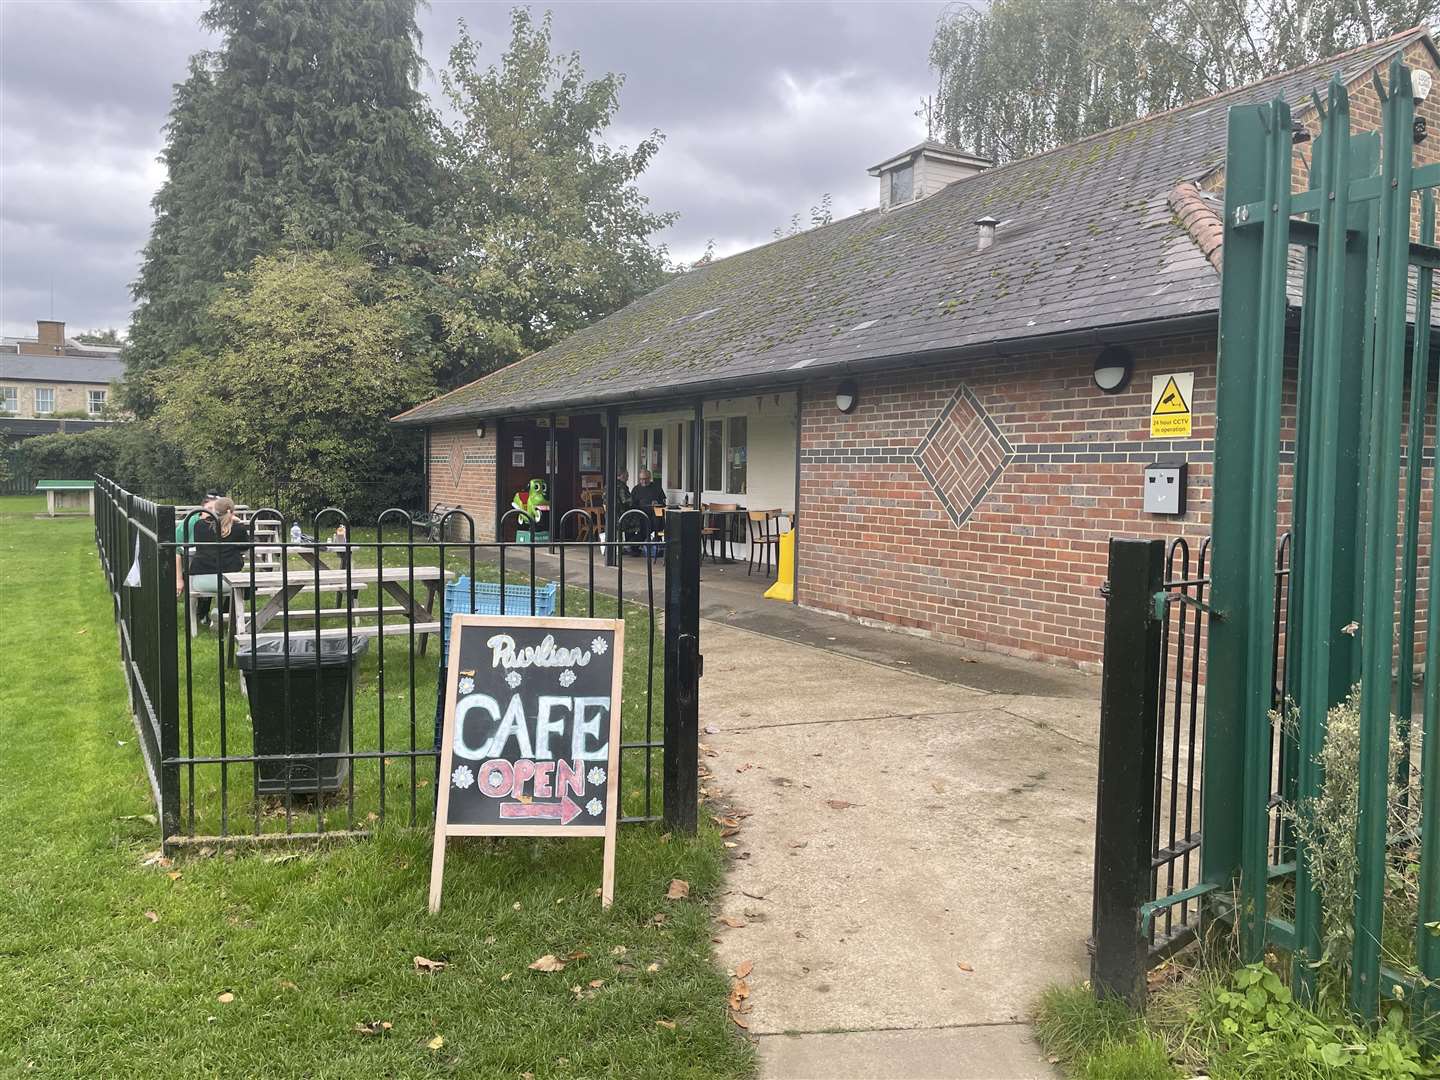 The Pavillion Café in Rocfort Road, Snodland, was targeted by a gang of youths while a chess club was going on